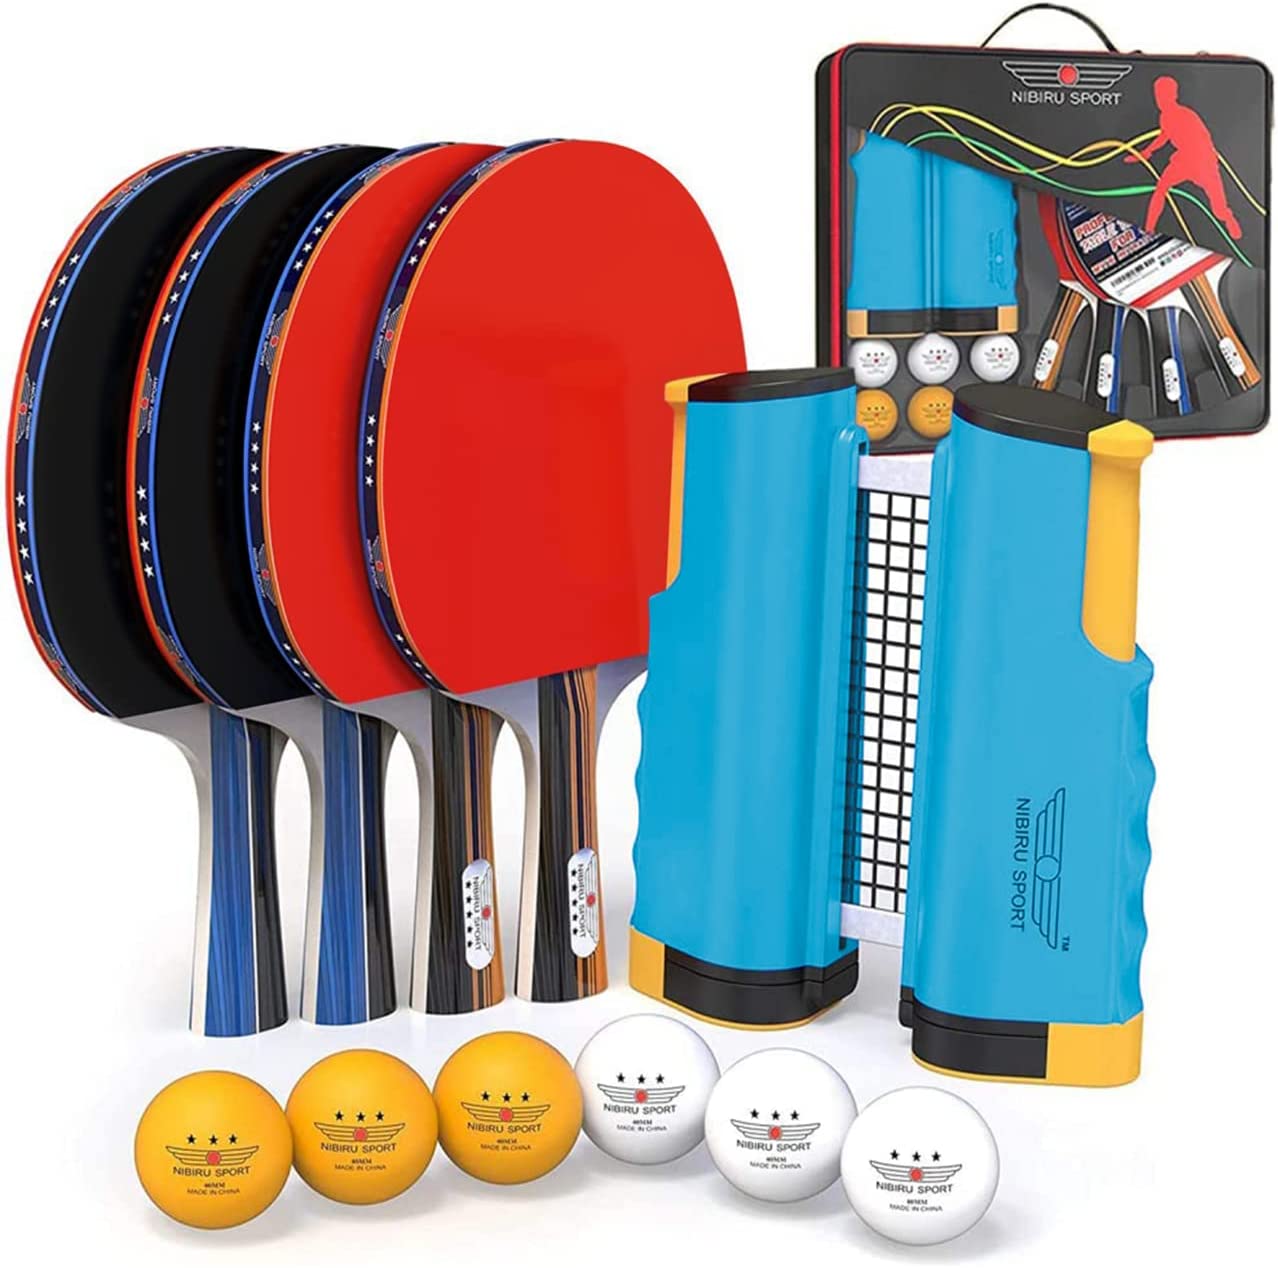 NIBIRU SPORT Ping Pong Paddles Set - Professional Table Tennis Rackets and Balls, Retractable Net with Posts and Storage Case - Pingpong Paddle and Game Table Accessories